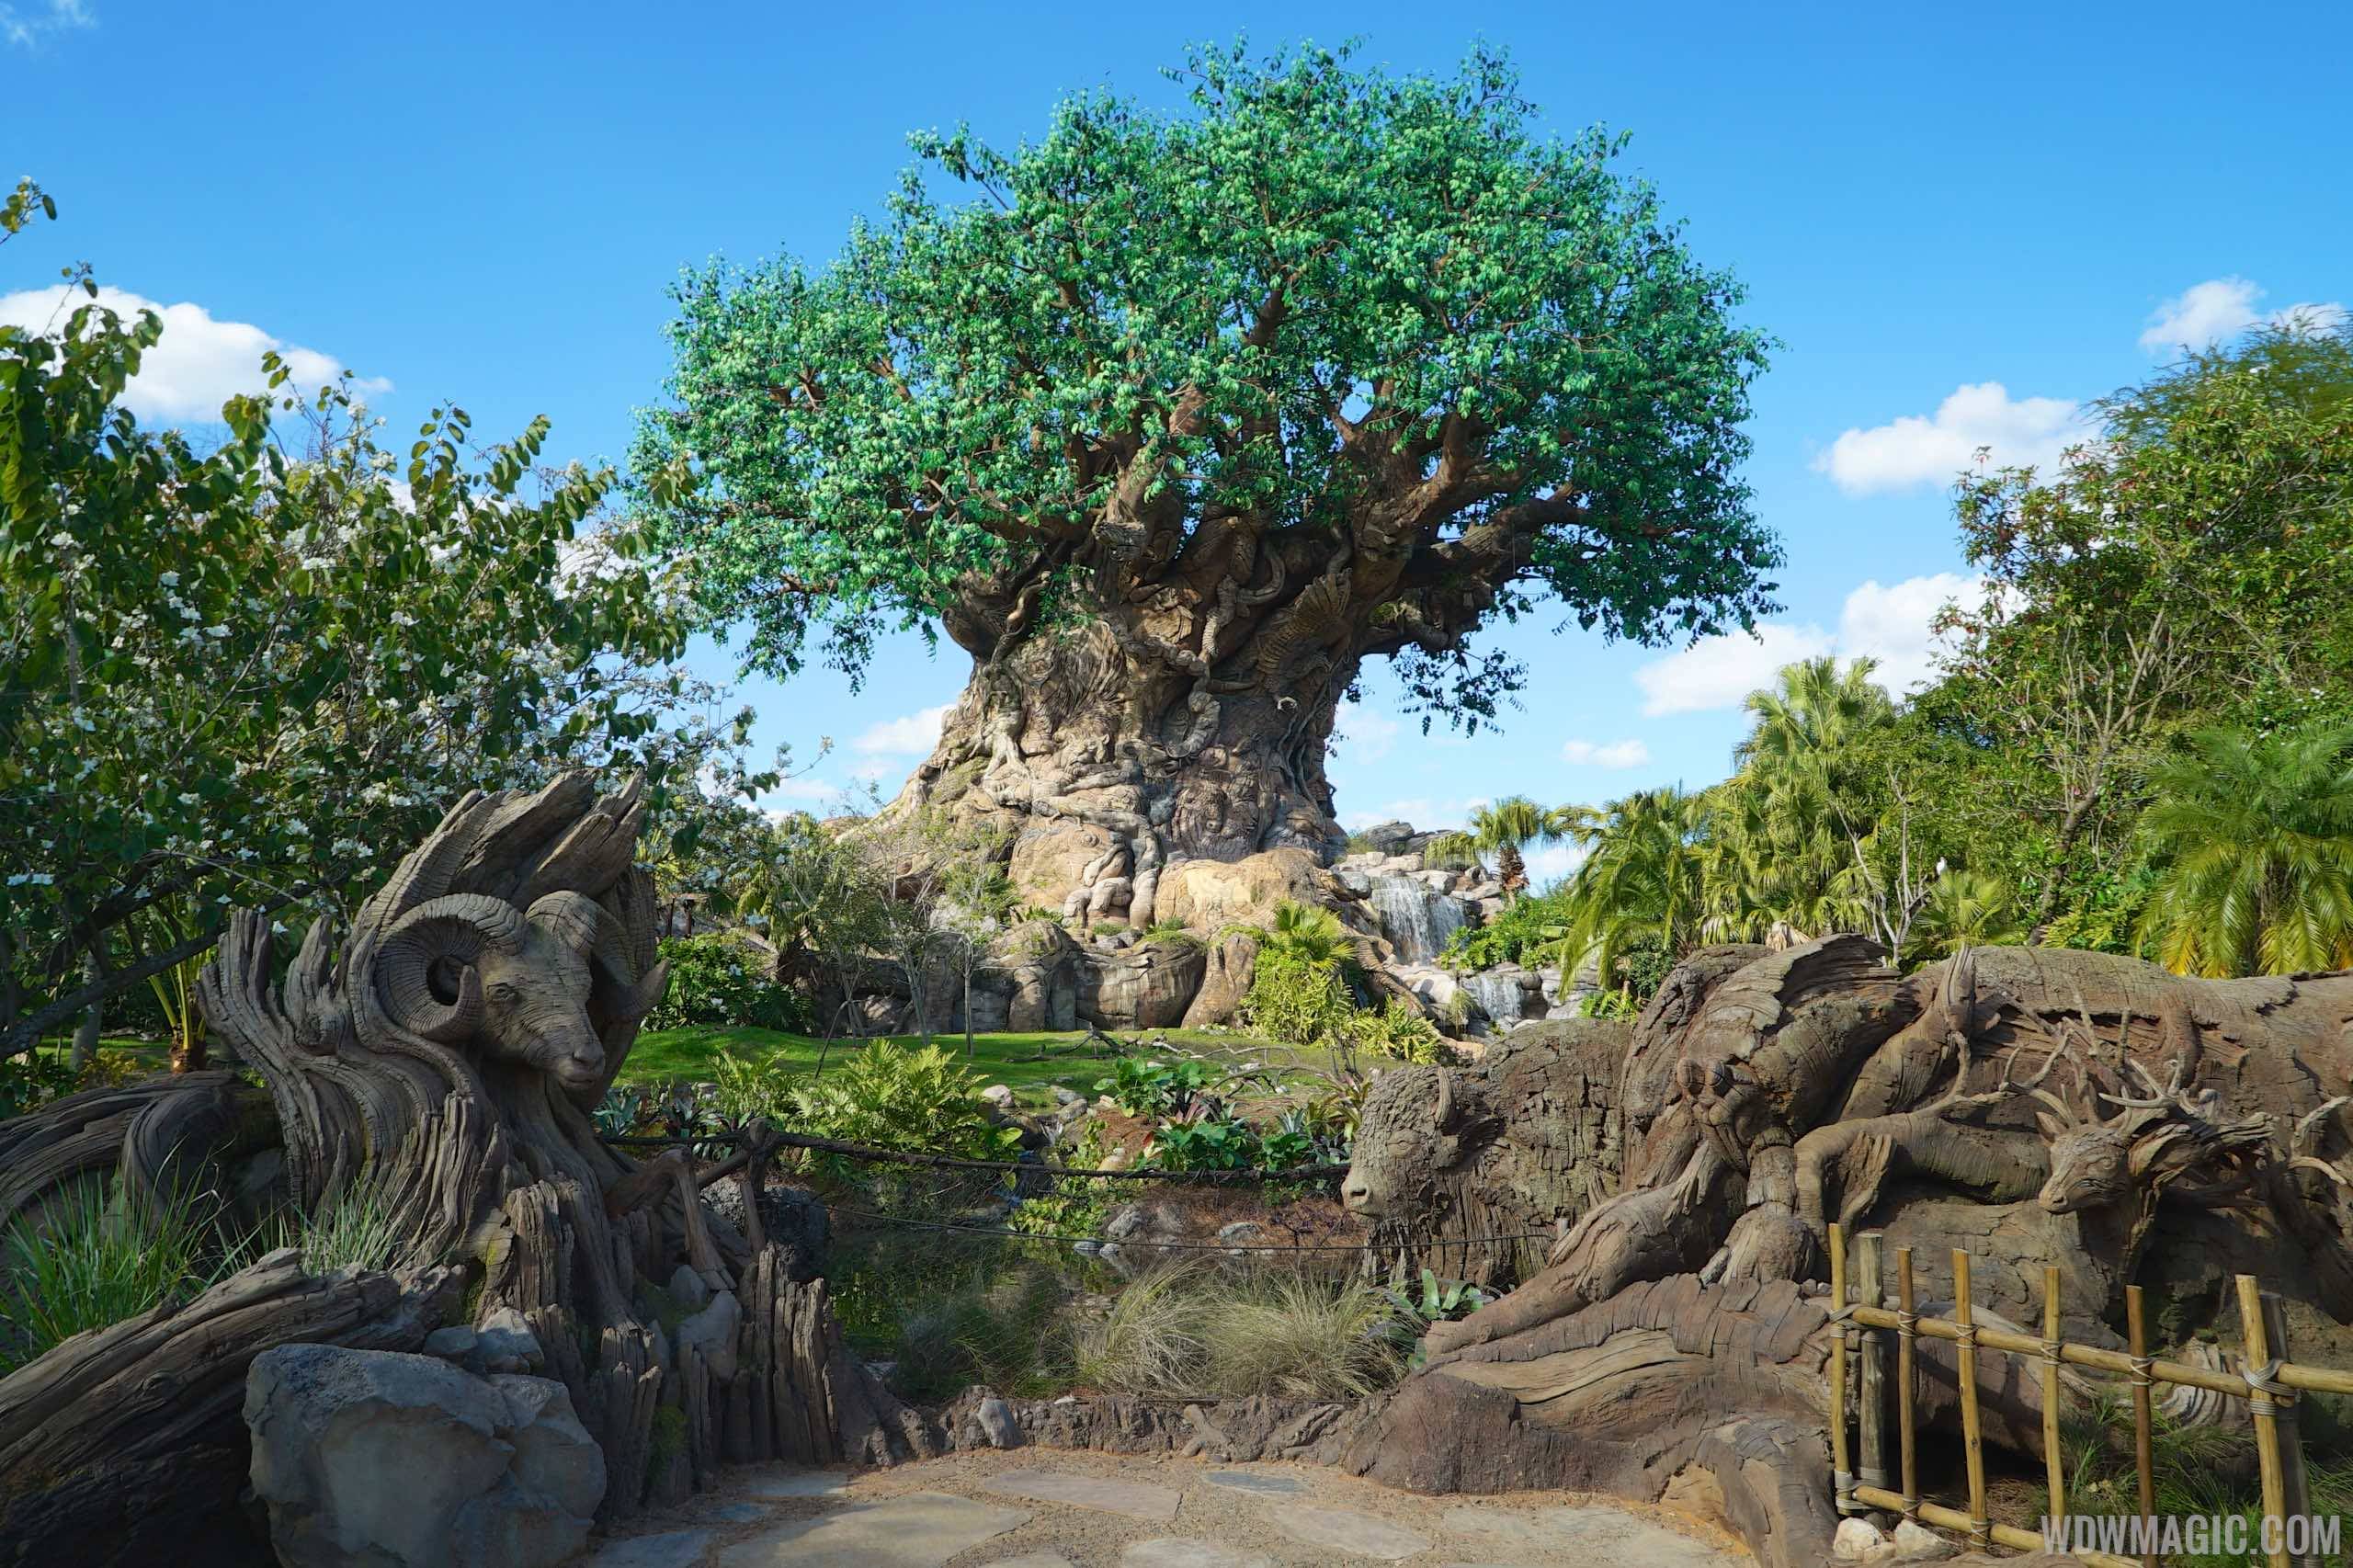 Disney's Animal Kingdom is provisionally planned to be operating from 8am to 6pm in early July